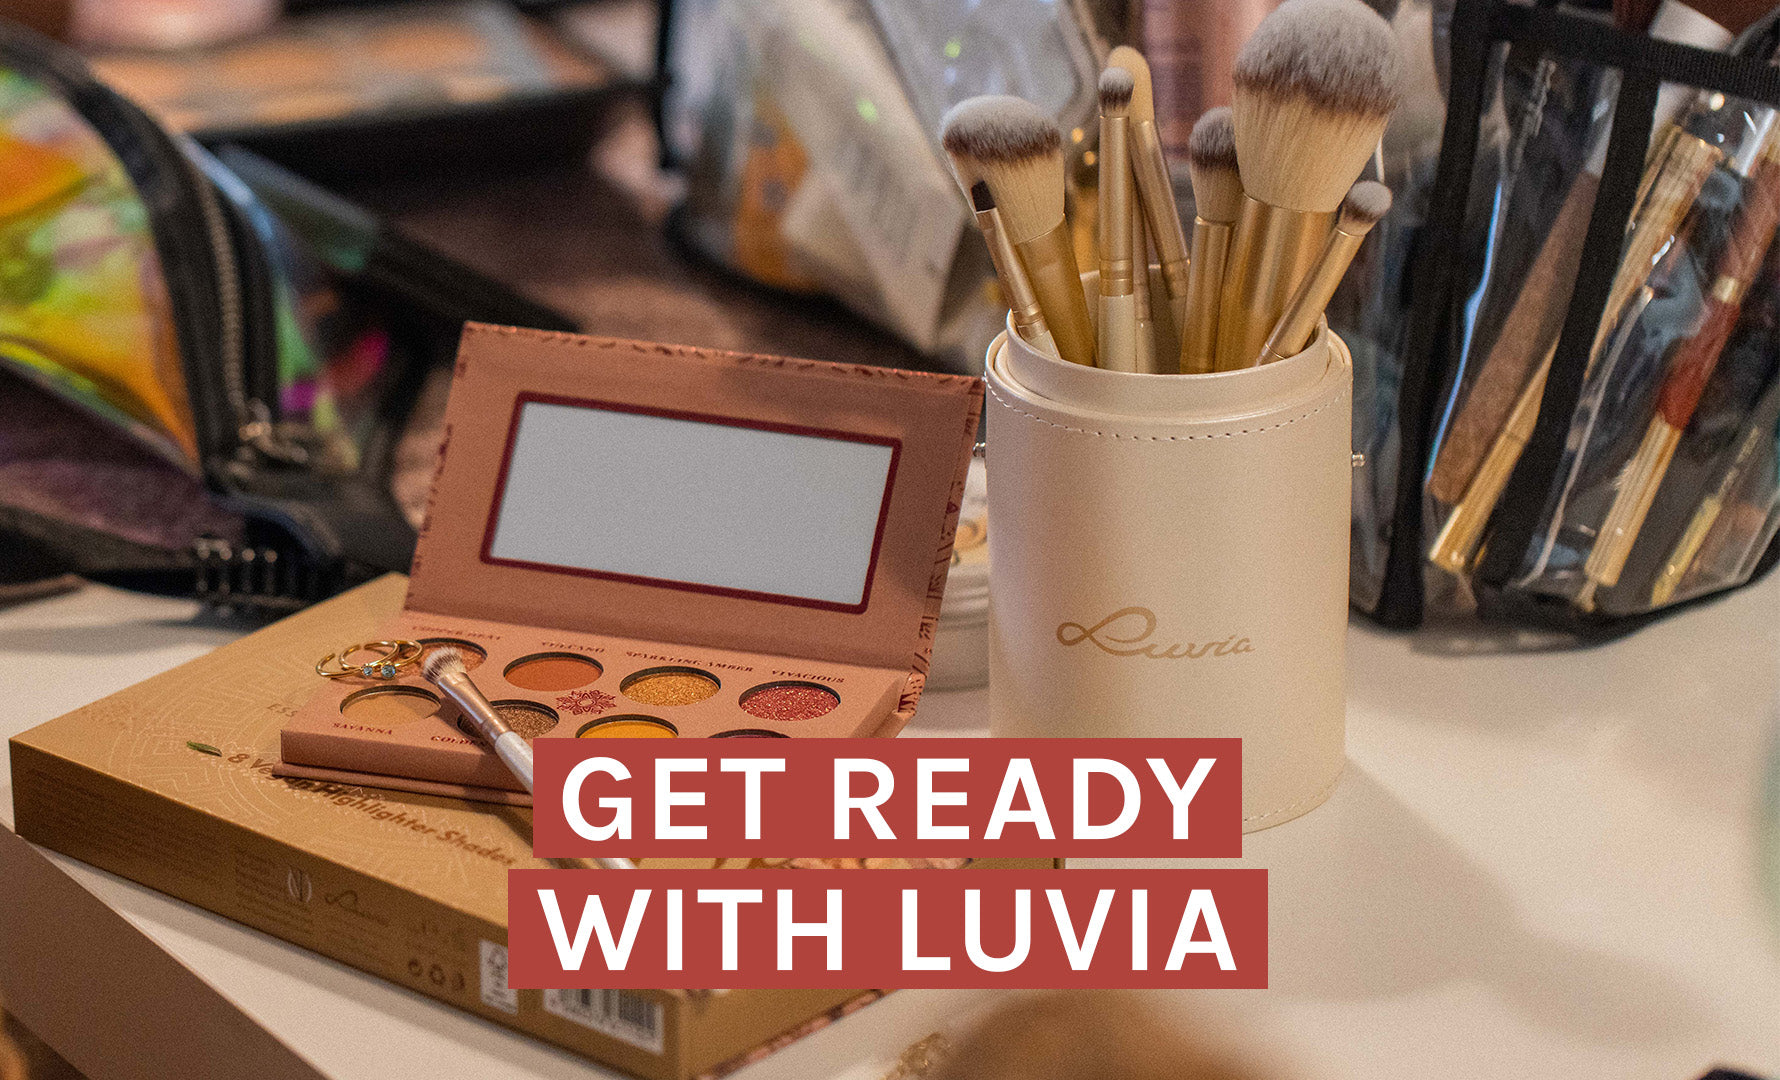 Get ready with LUVIA